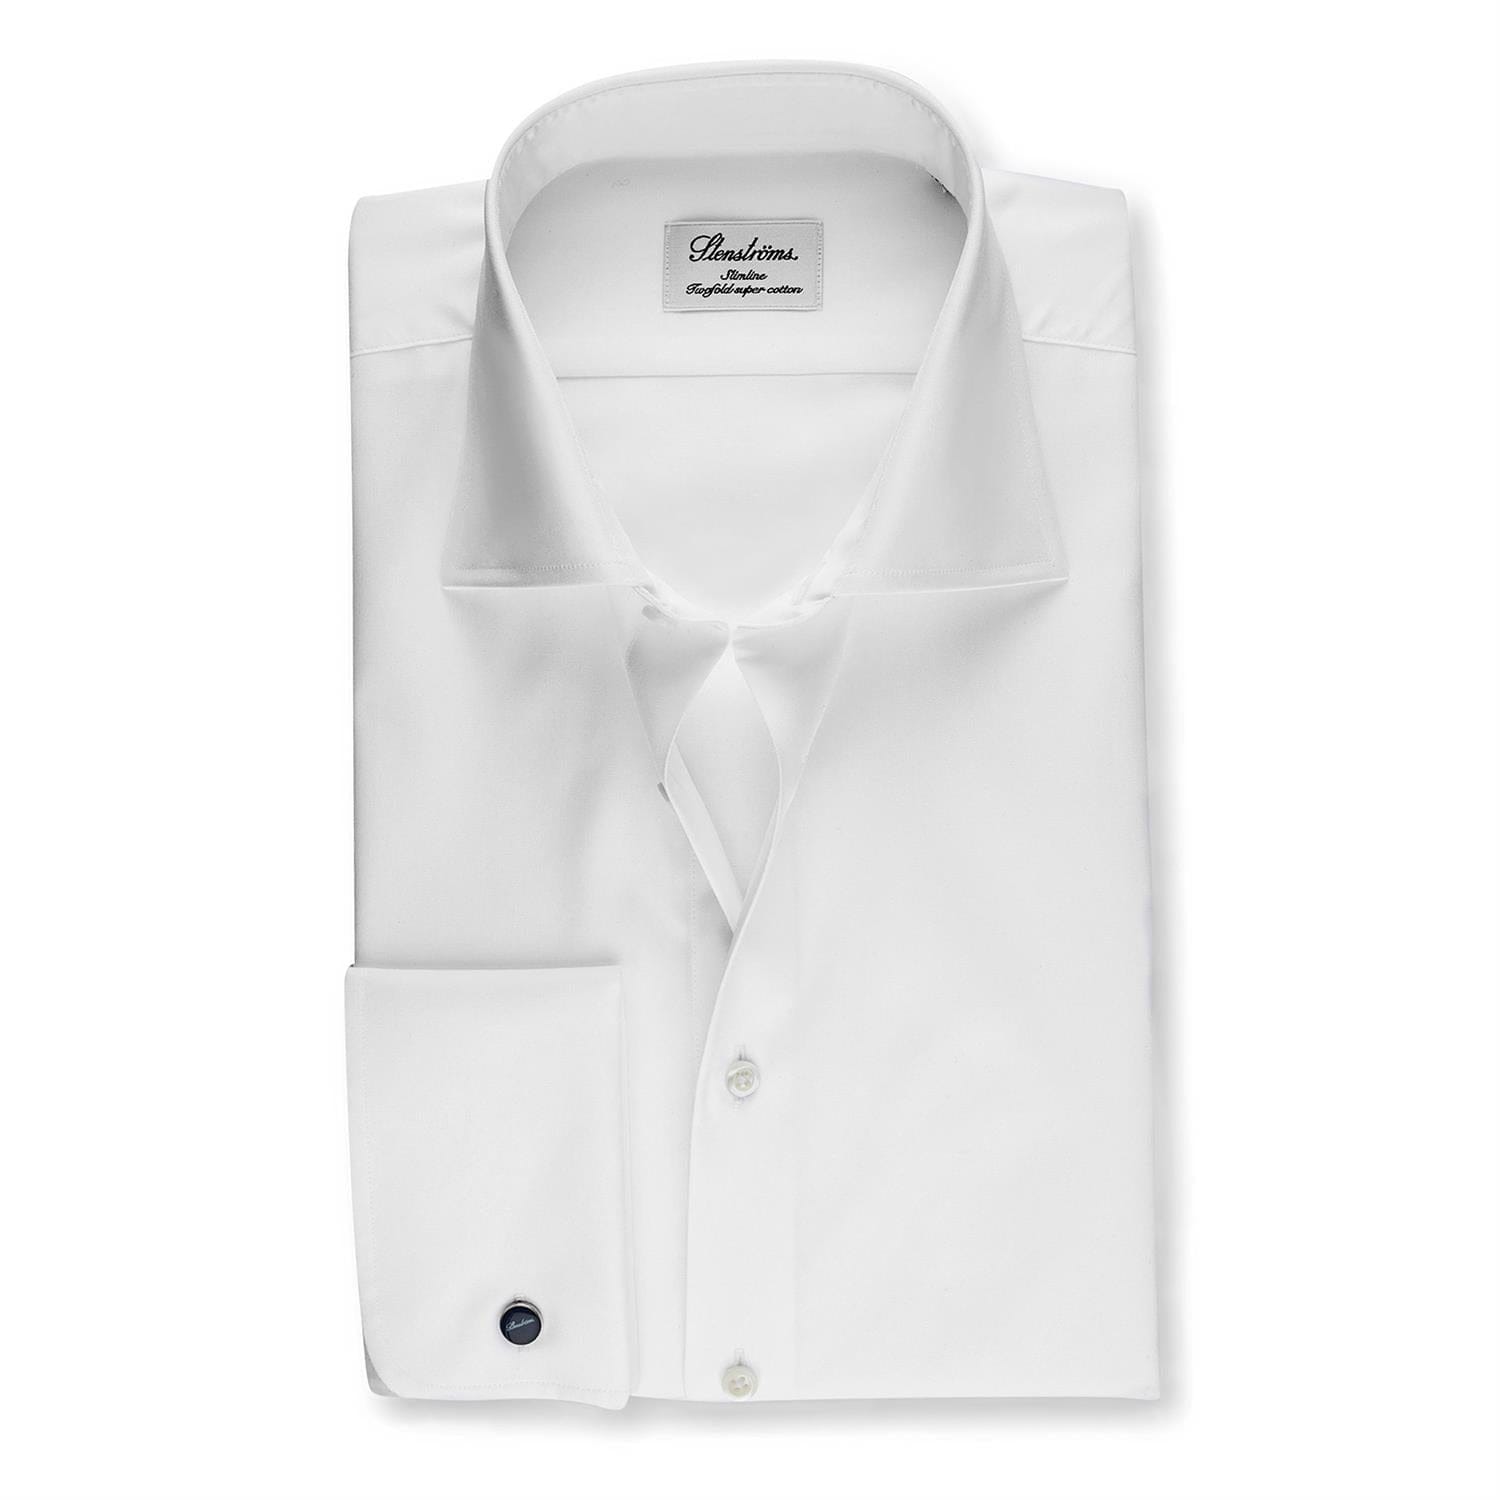 White Slimline Shirt With French Cuffs Extra Long Sleeve